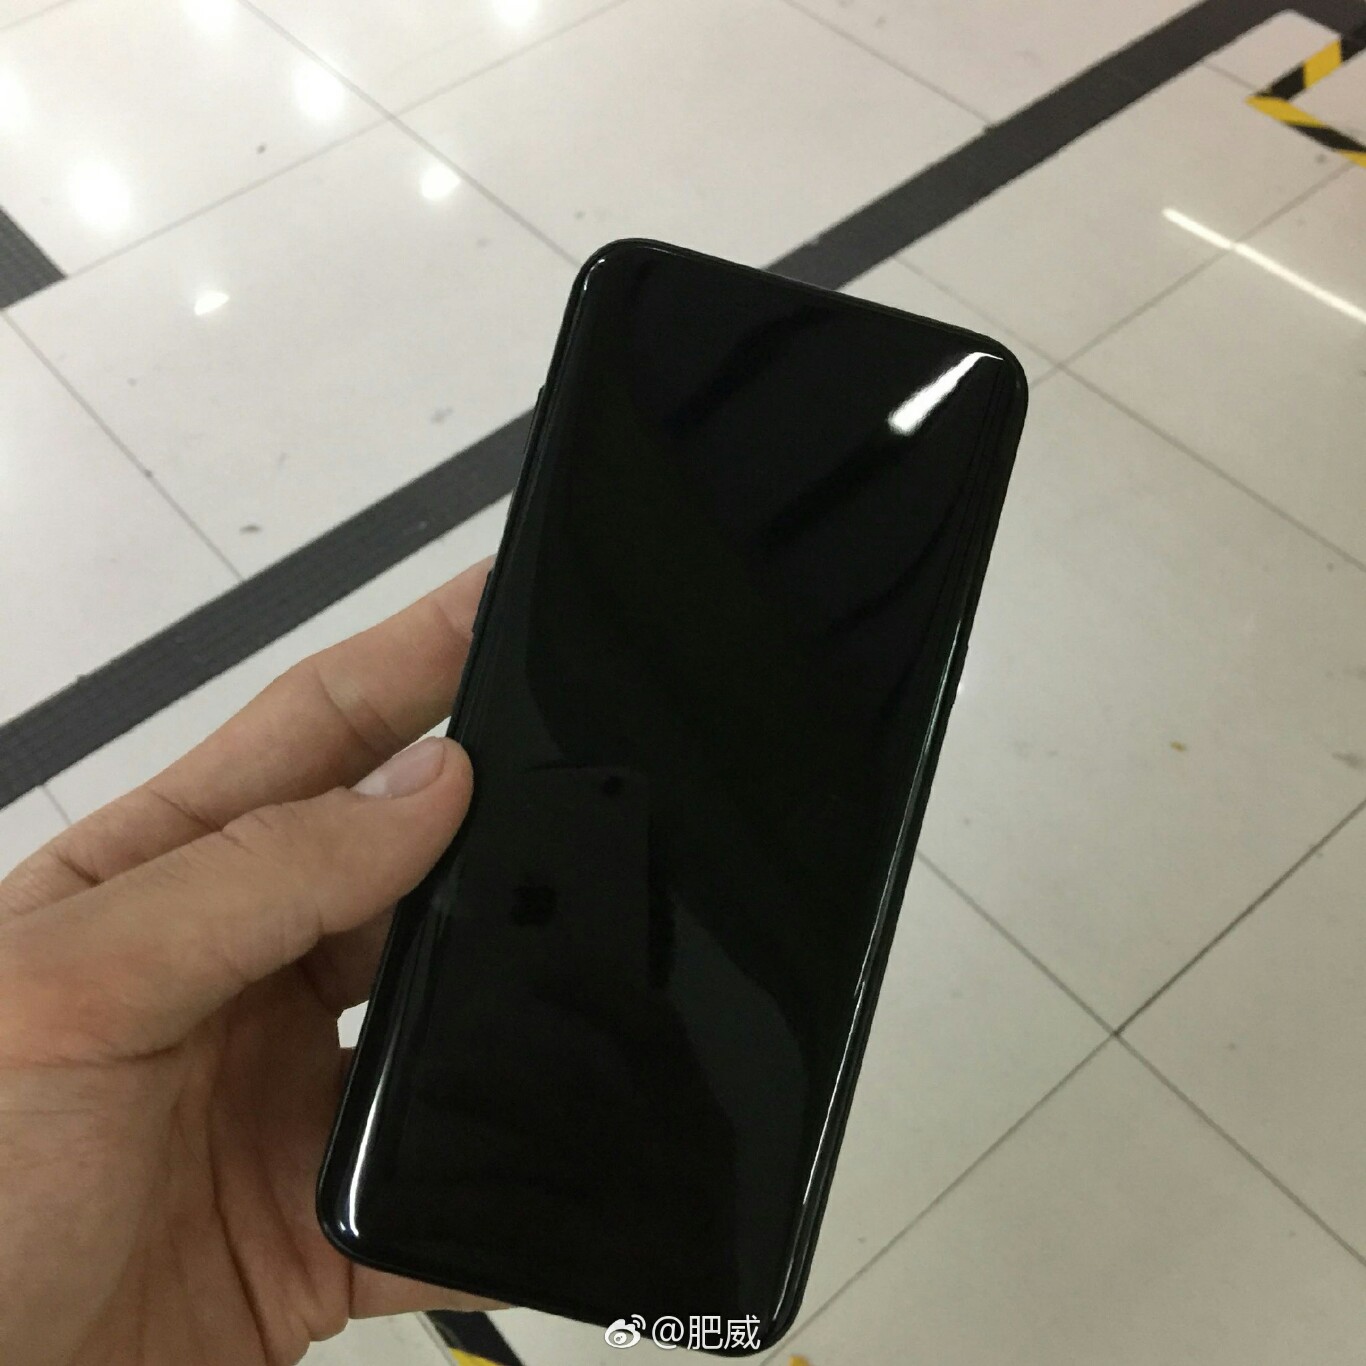 Black color Galaxy S8 leaks in new pics 9